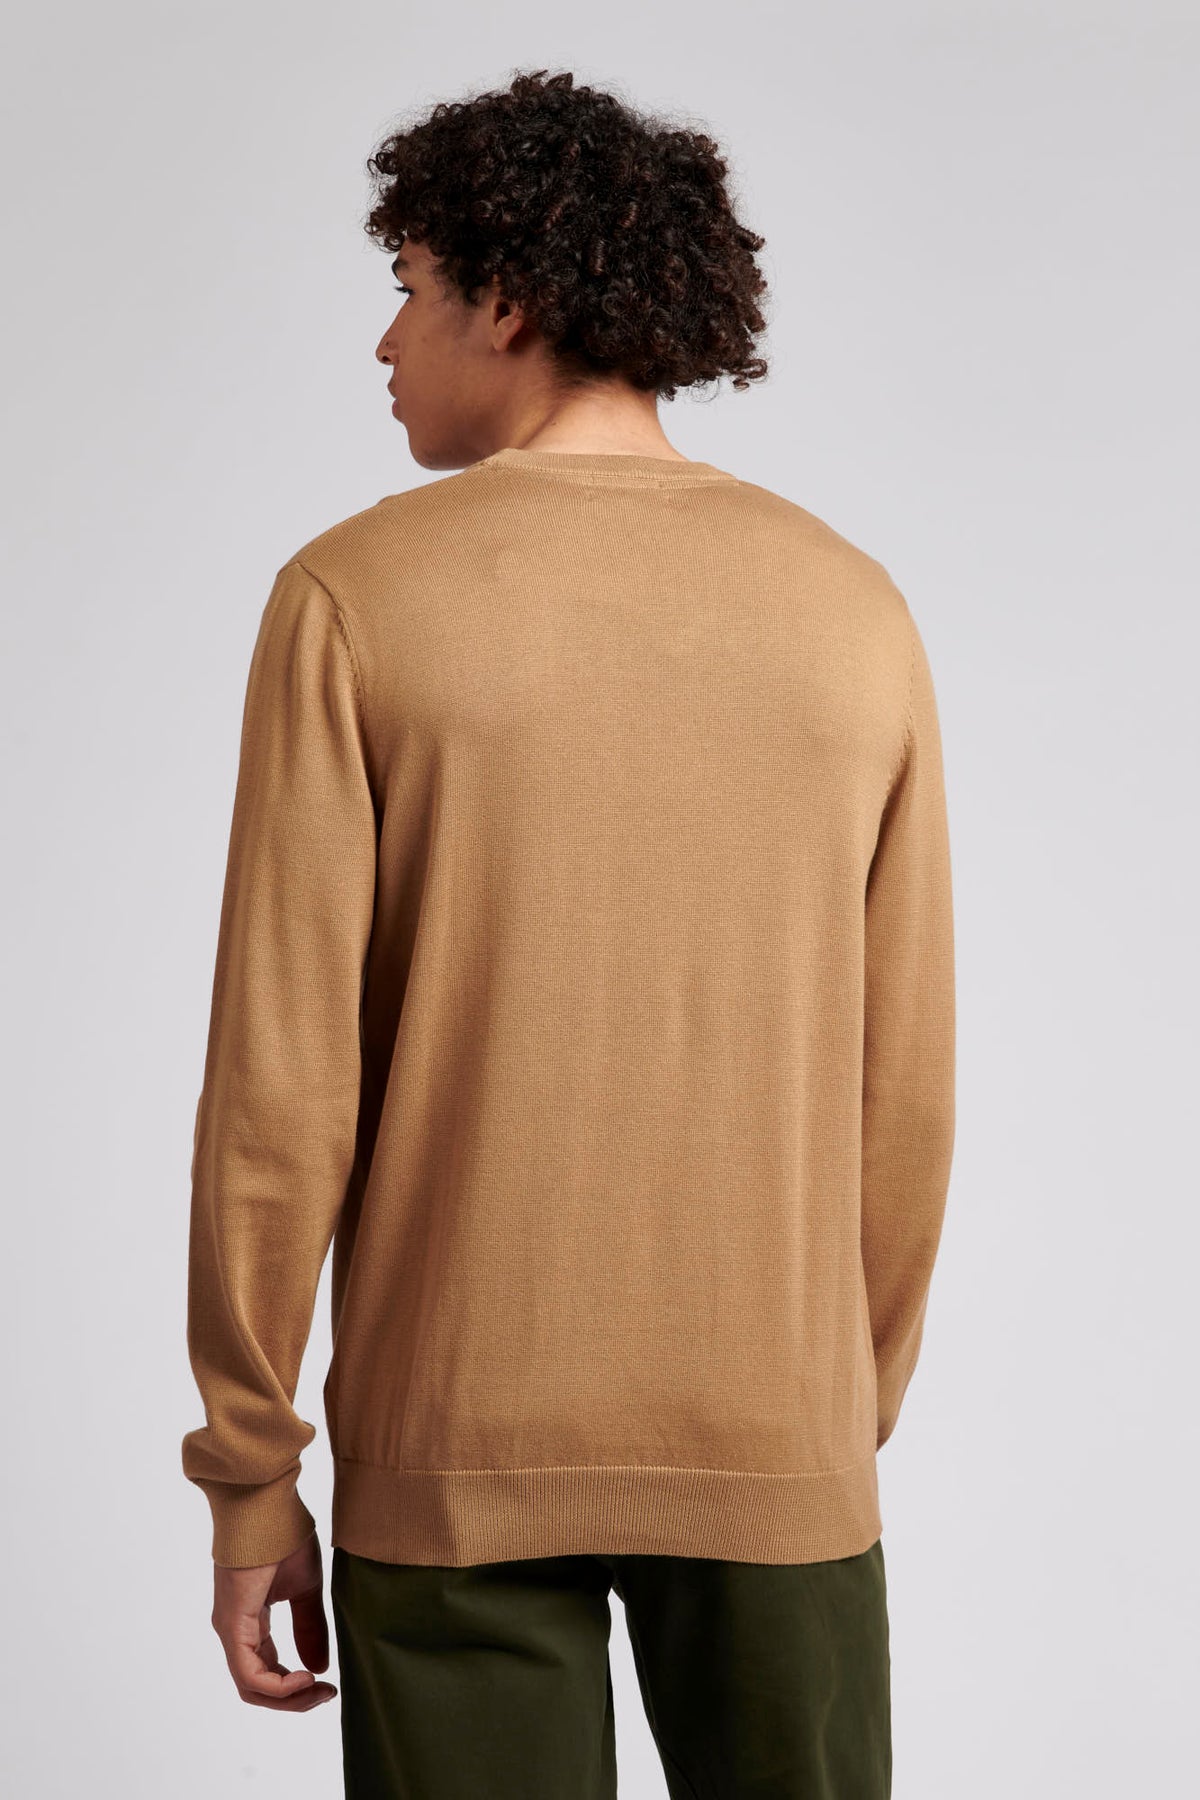 Mens Crew Neck Knitted Jumper in Tigers Eye